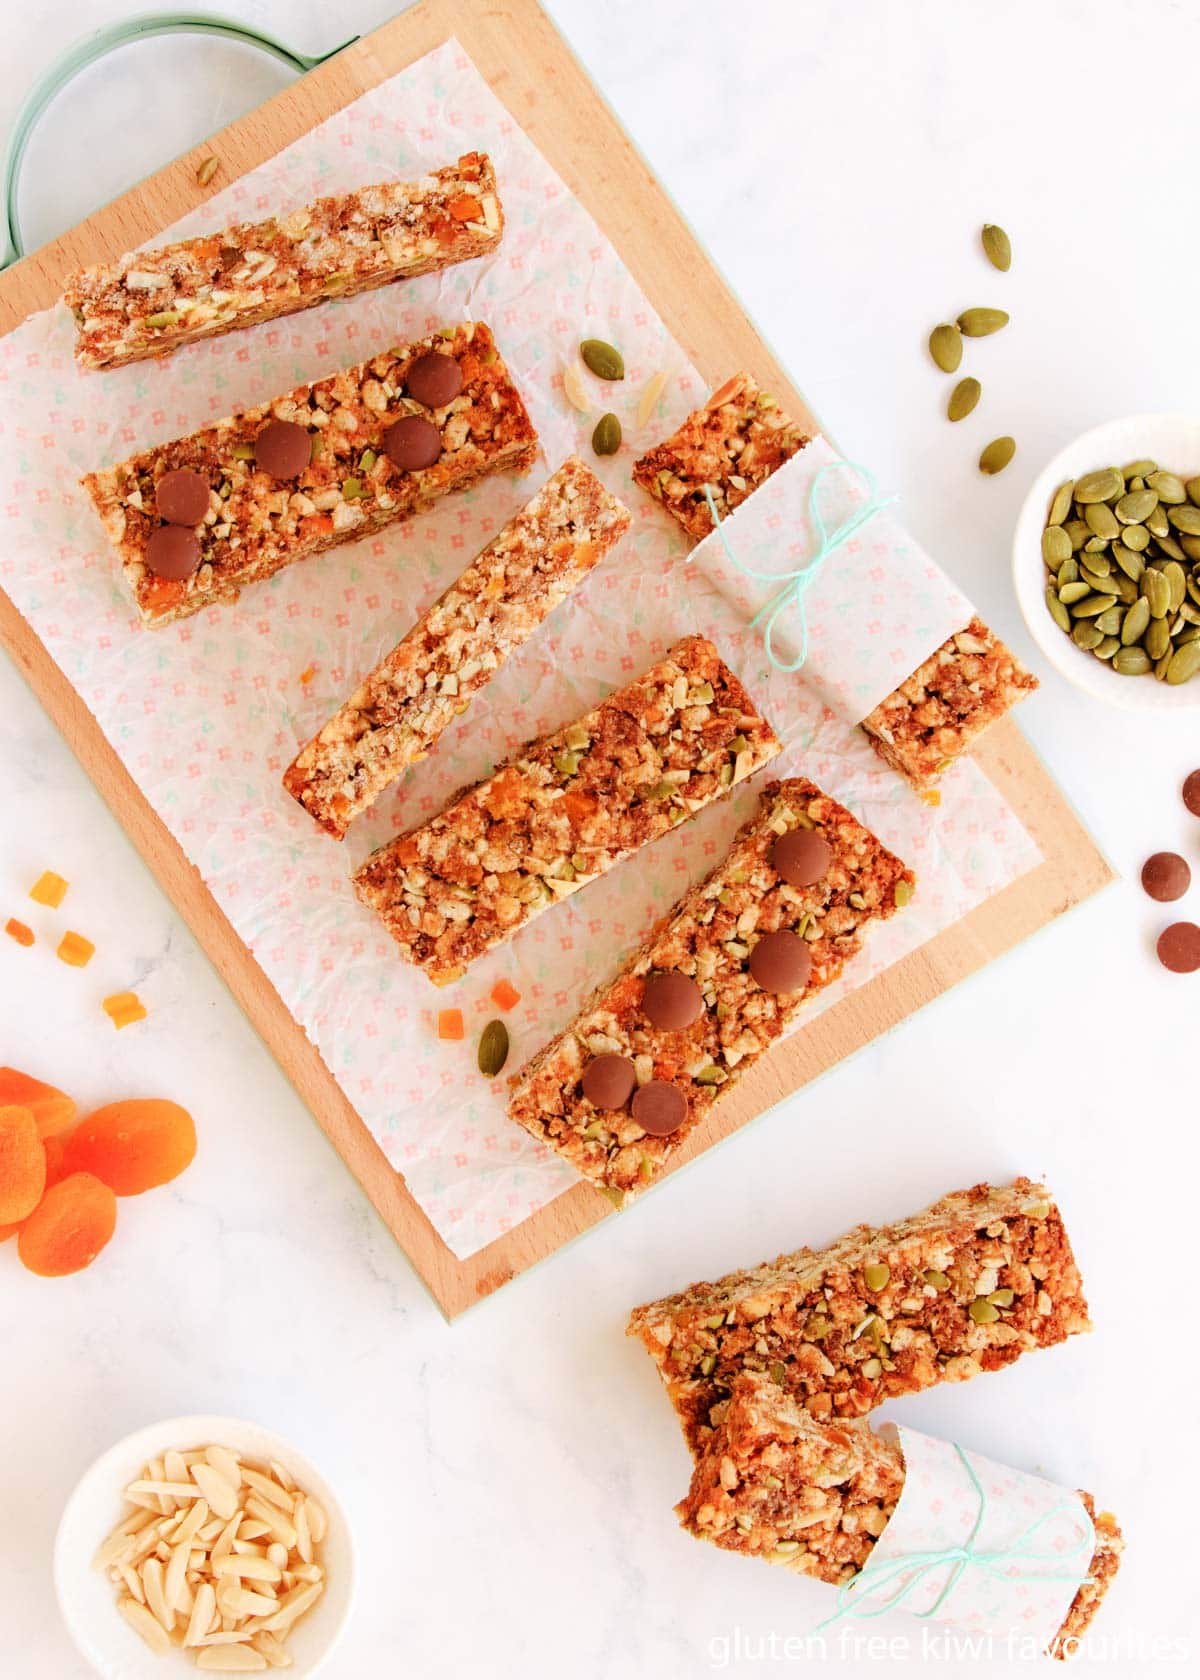 Muesli bars on a wooden board - some are topped with chocolate chips, and two are wrapped with baking paper and twine.